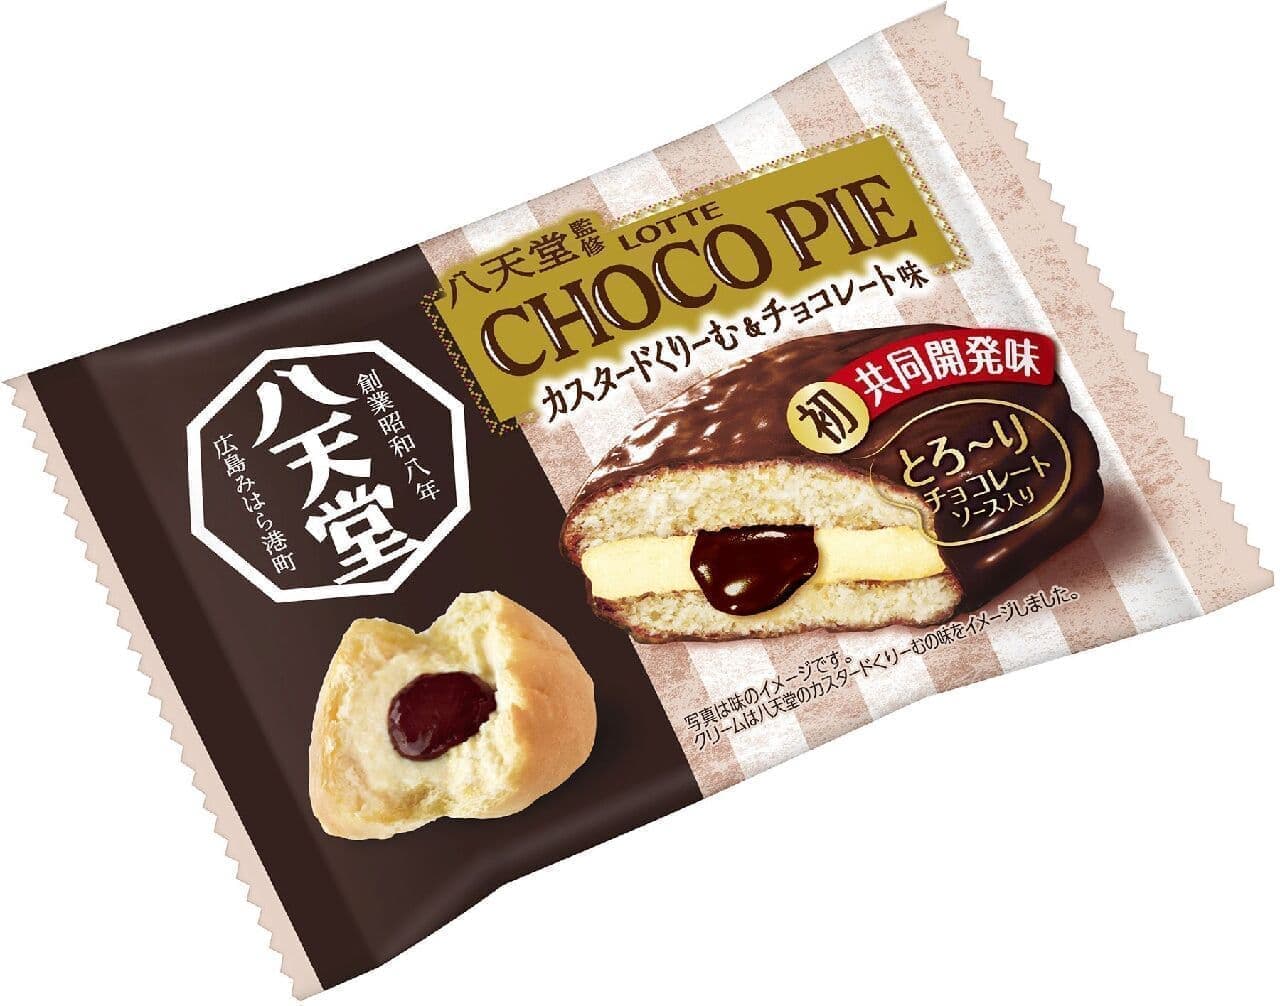 Lotte "Choco pie supervised by Hattendo [Custard cream & chocolate flavor] sold individually"